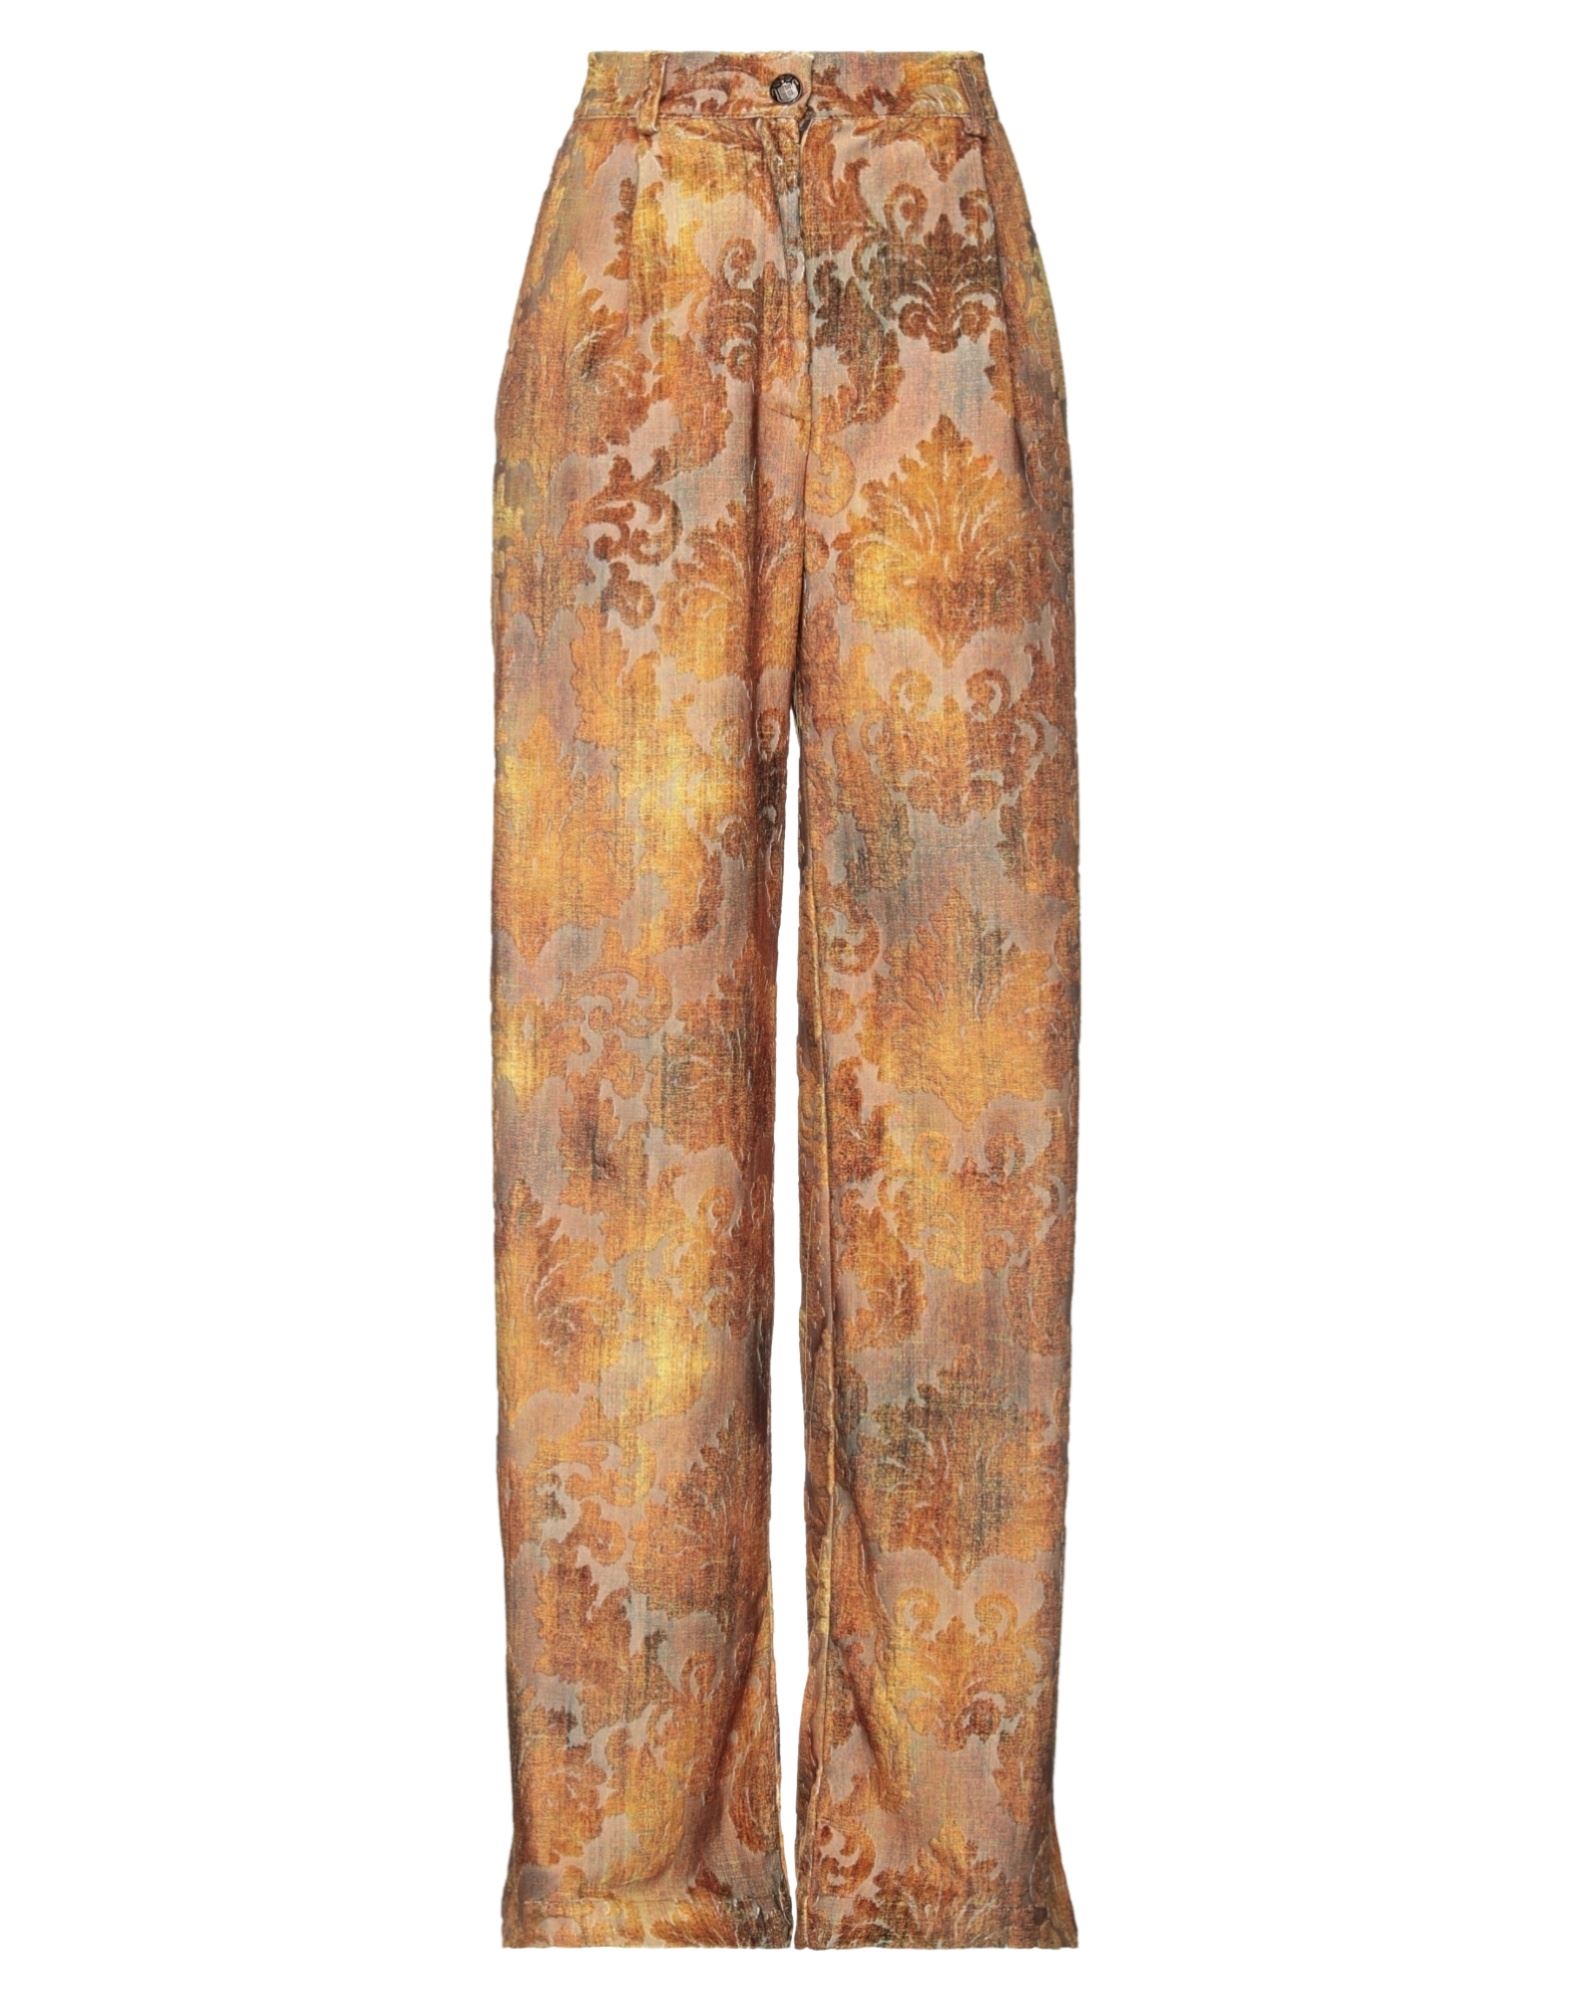 Brand Unique Pants In Brown